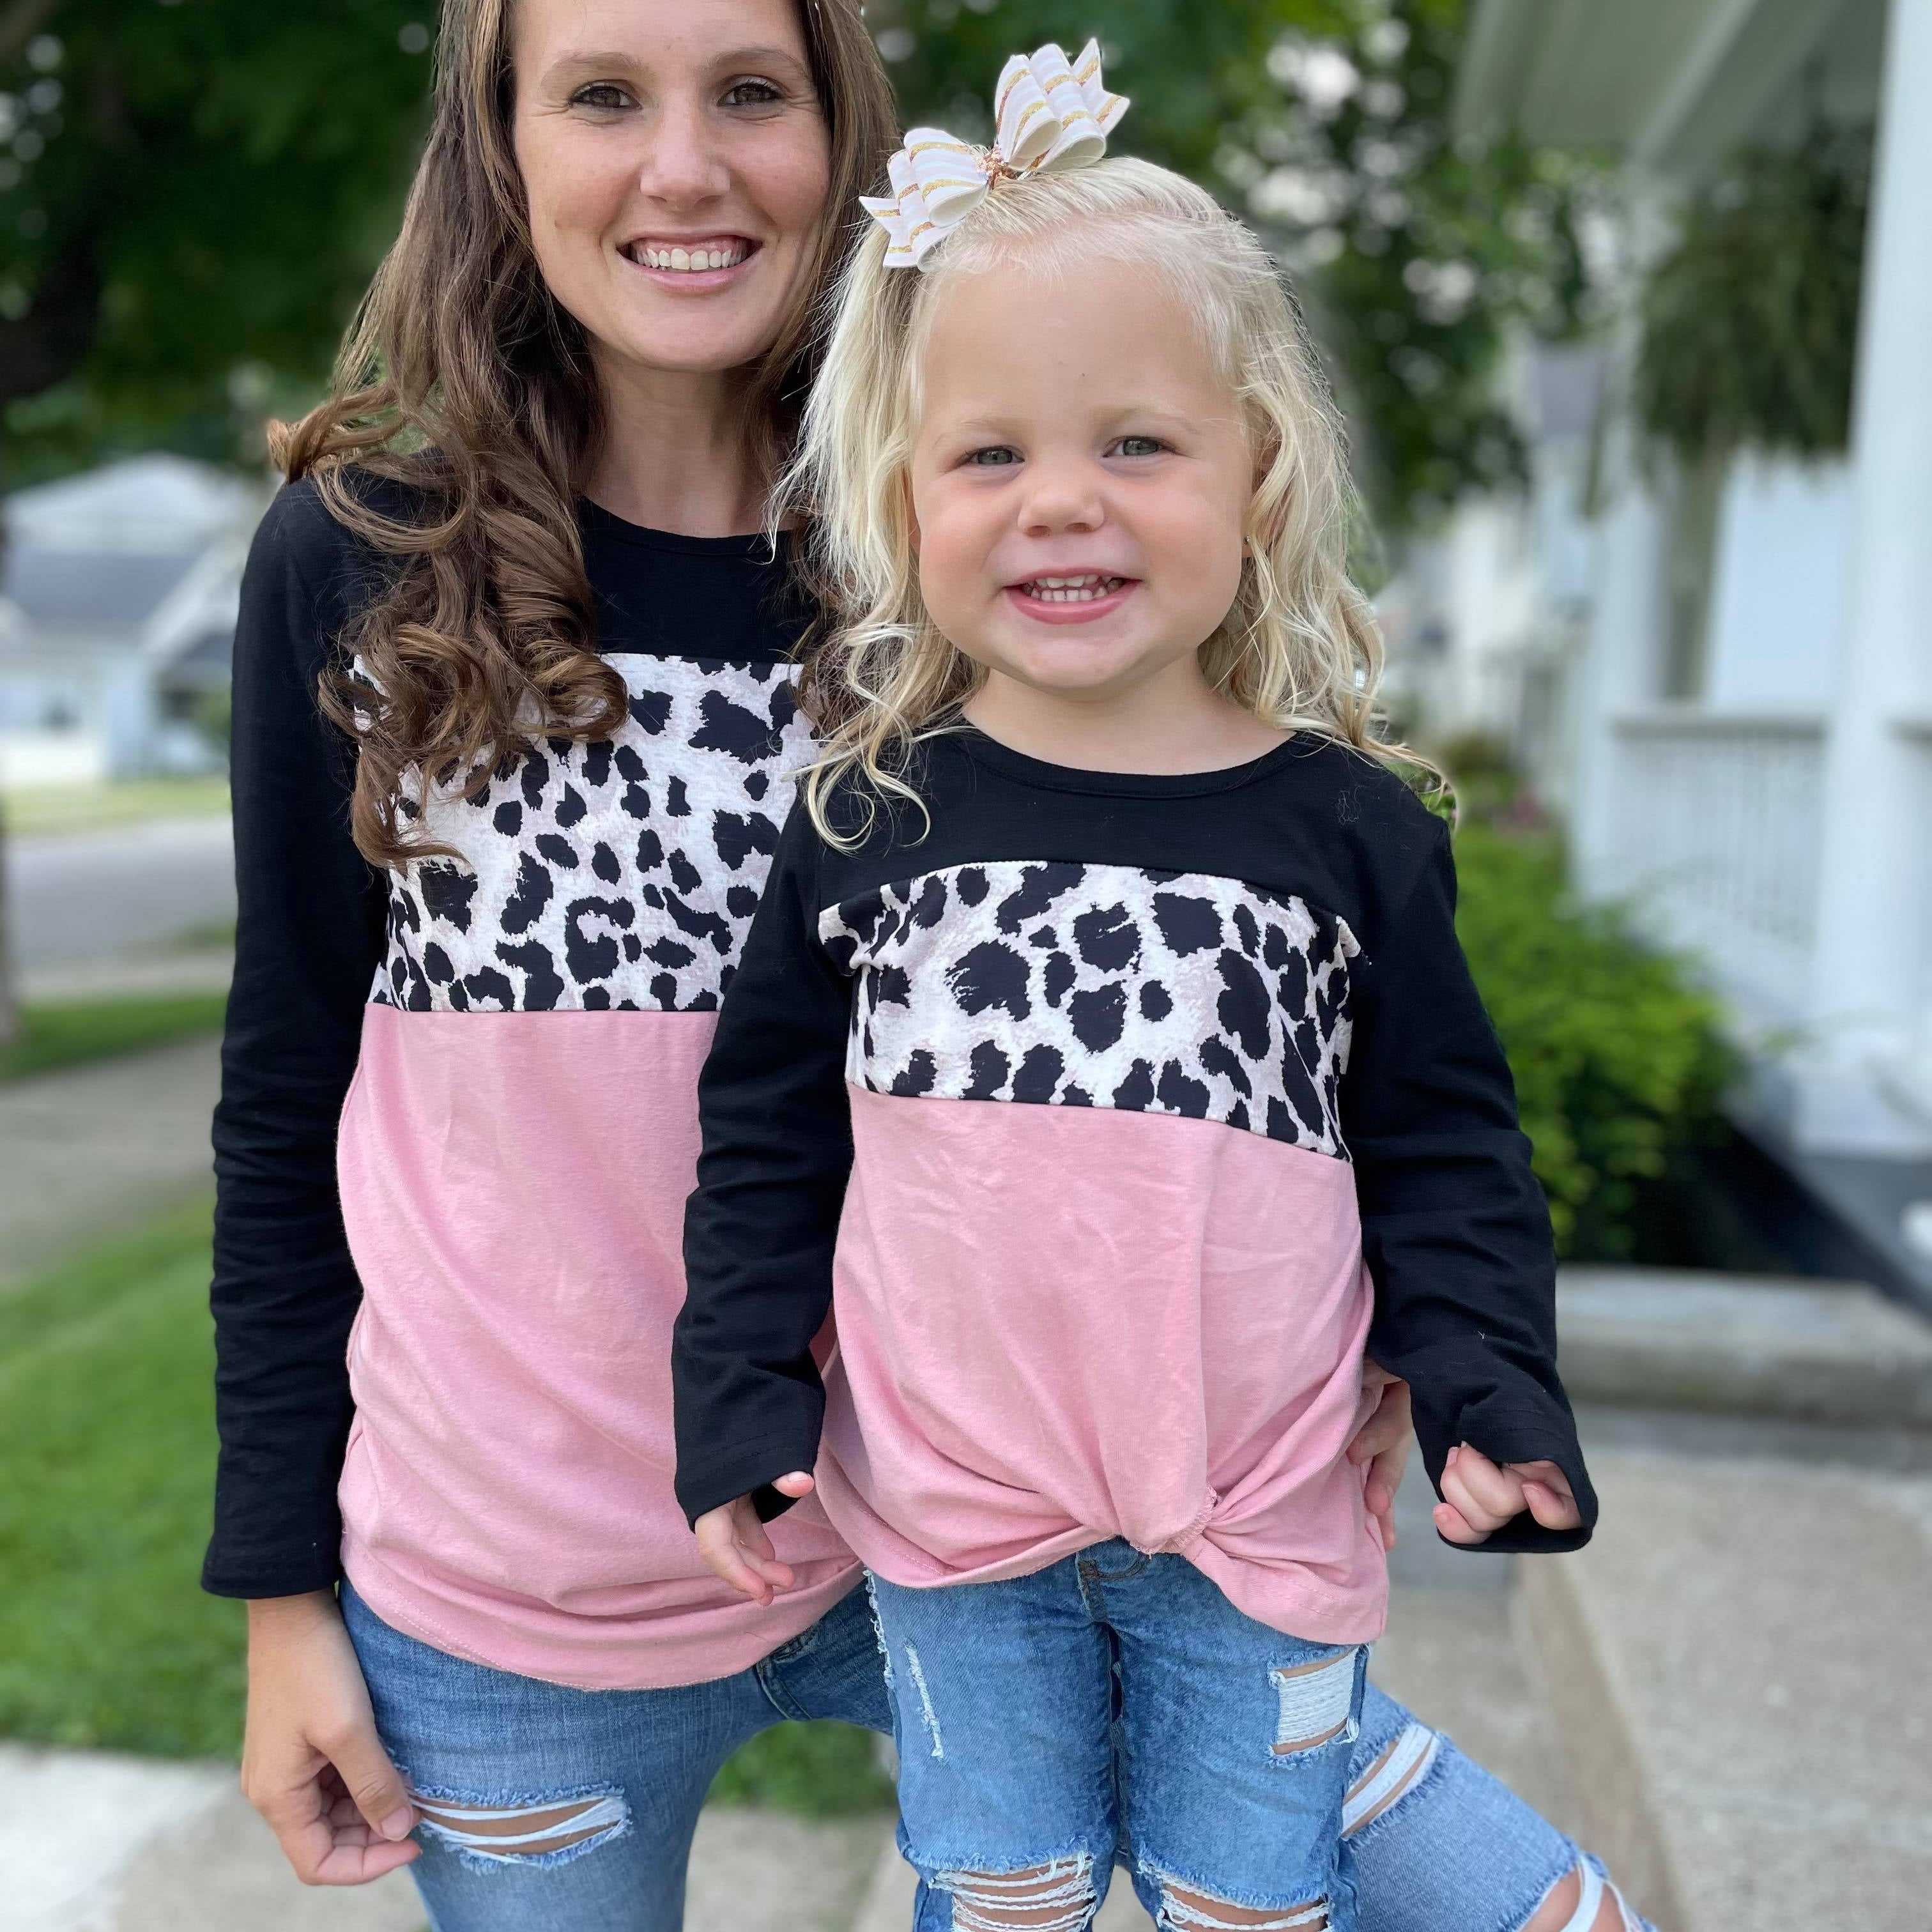 High Quality Kids Clothes that Let Kids be Kids - Akron Ohio Moms